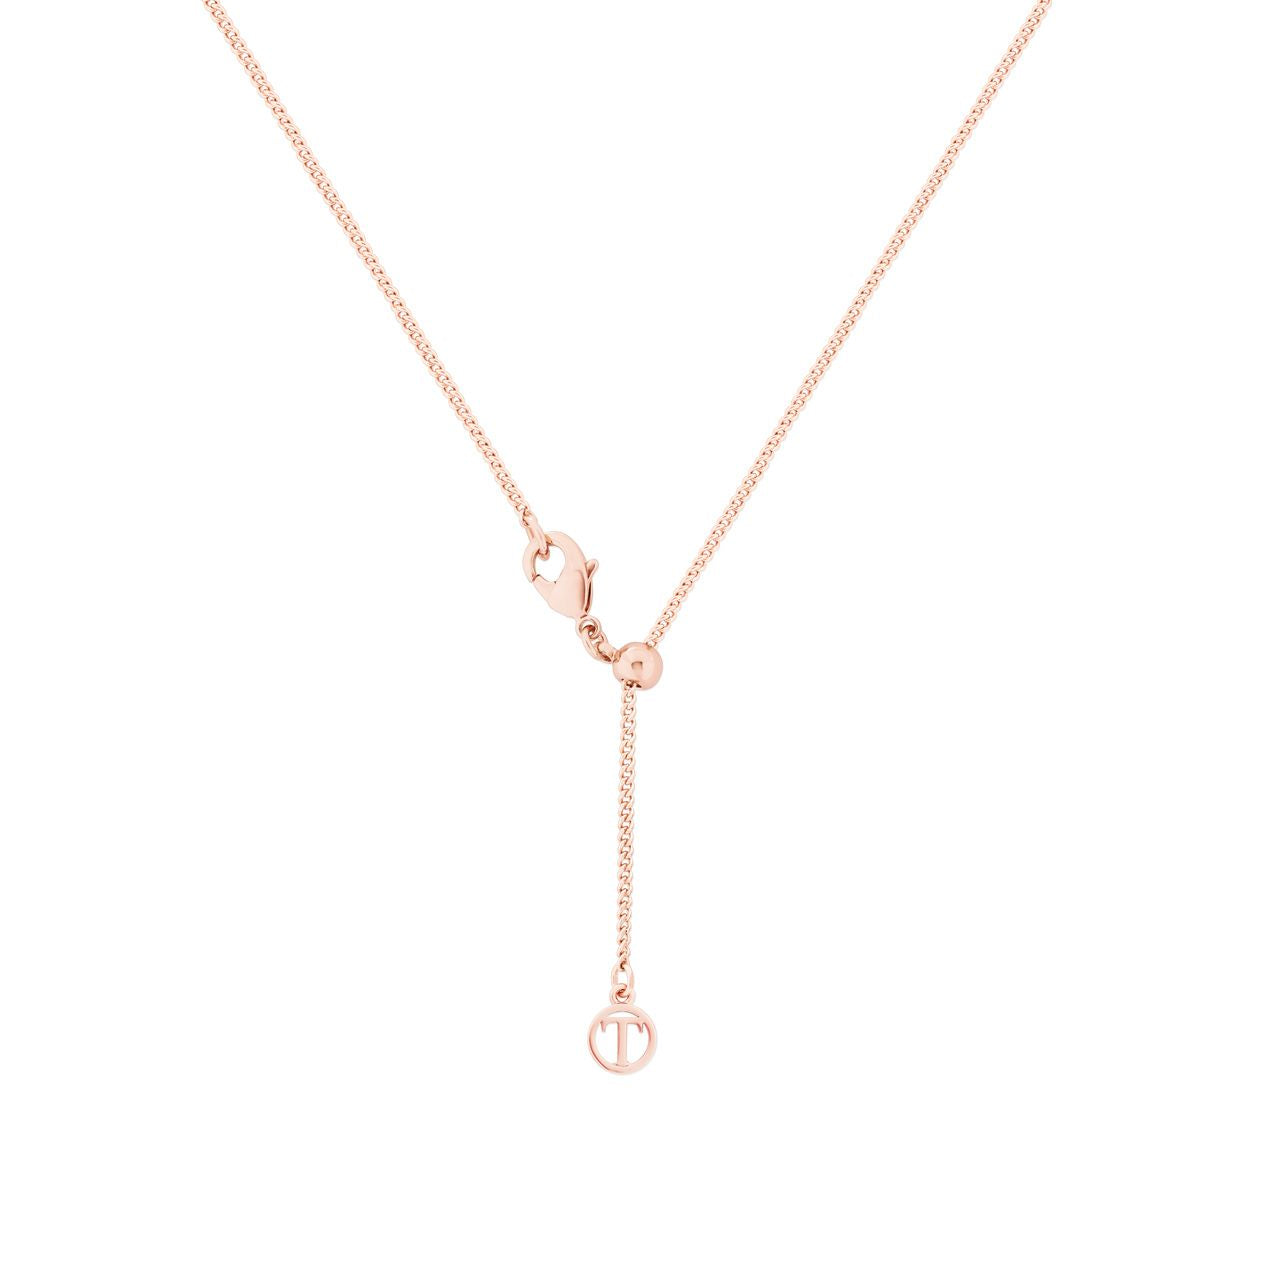 T-Bar Pendant Rose Gold With Six Mini Pearls by Tipperary  This gorgeous Tipperary T-Bar Pendant Rose Gold Six Mini Pearls is a timeless and sophisticated piece that will give any look a classic and elegant feel. Made from rose gold, and accented with six mini pearls, this pendant is perfect for completing any outfit.